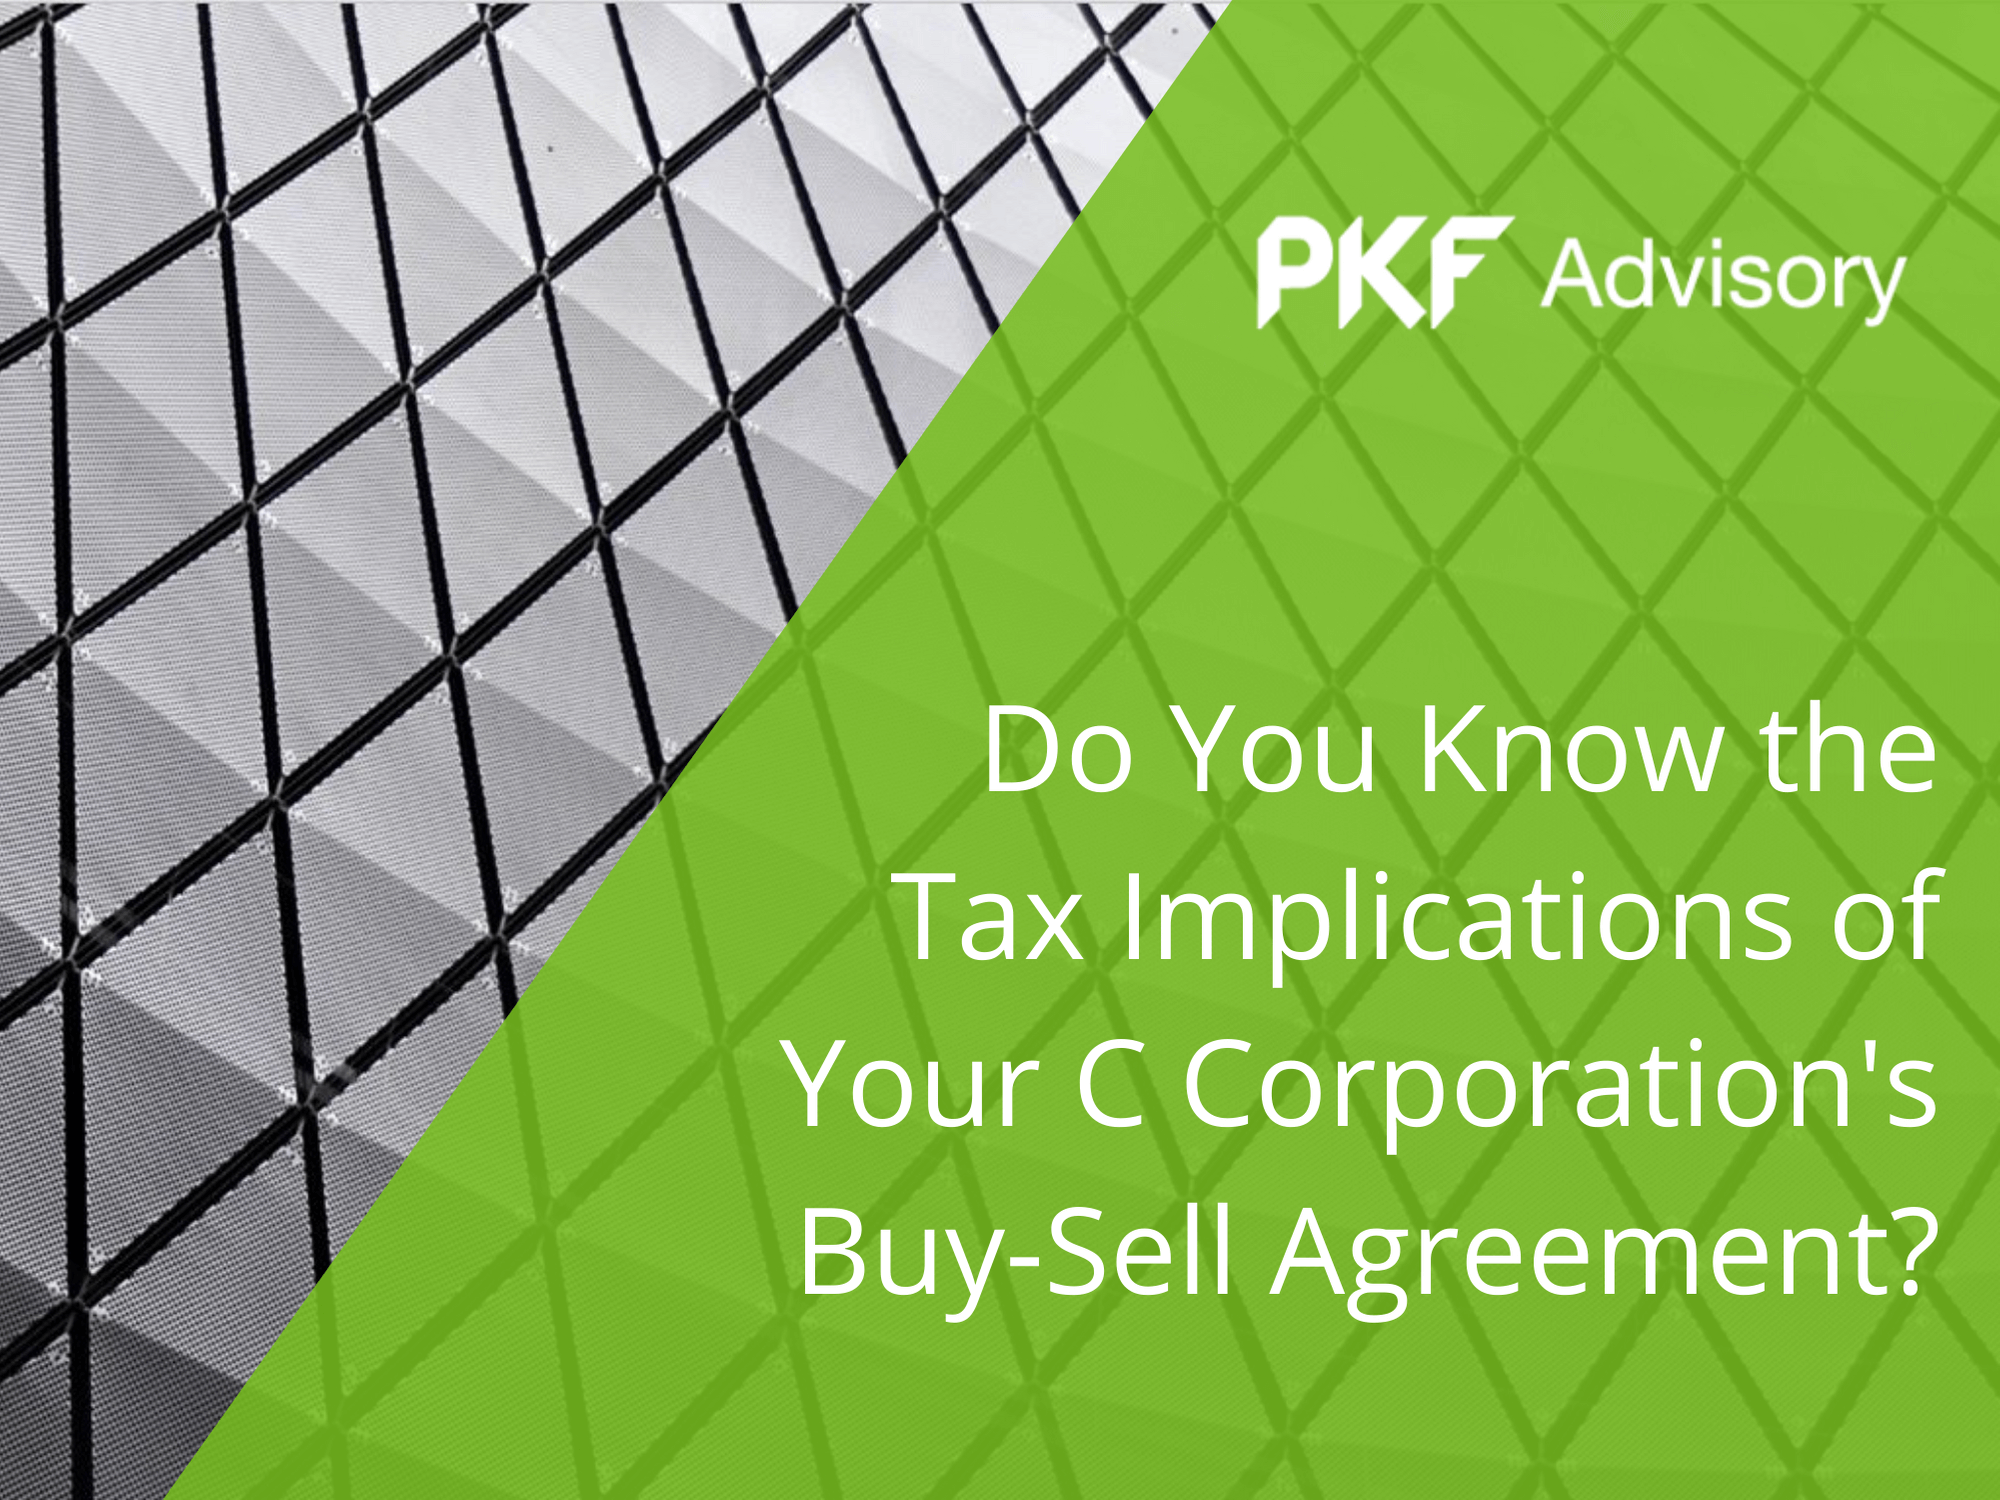 Do You Know the Tax Implications of Your C Corporation's Buy-Sell Agreement? - PKF Advisory